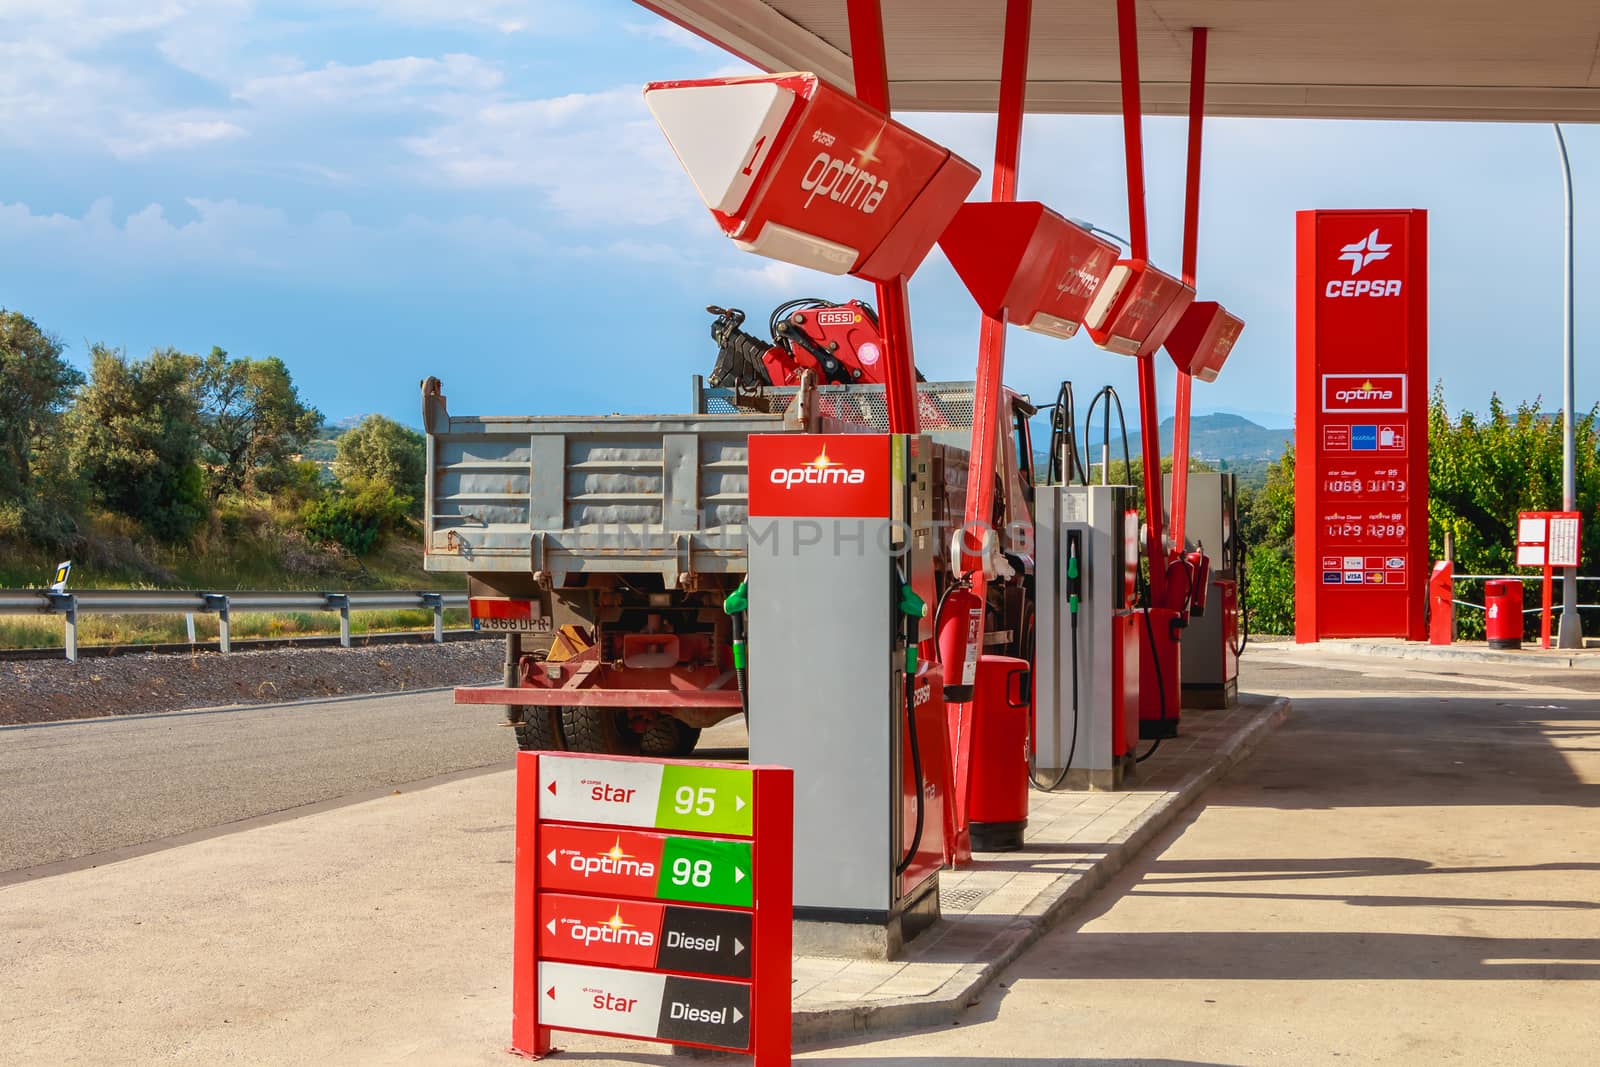 detail of a CEPSA gas station on a small country road by AtlanticEUROSTOXX